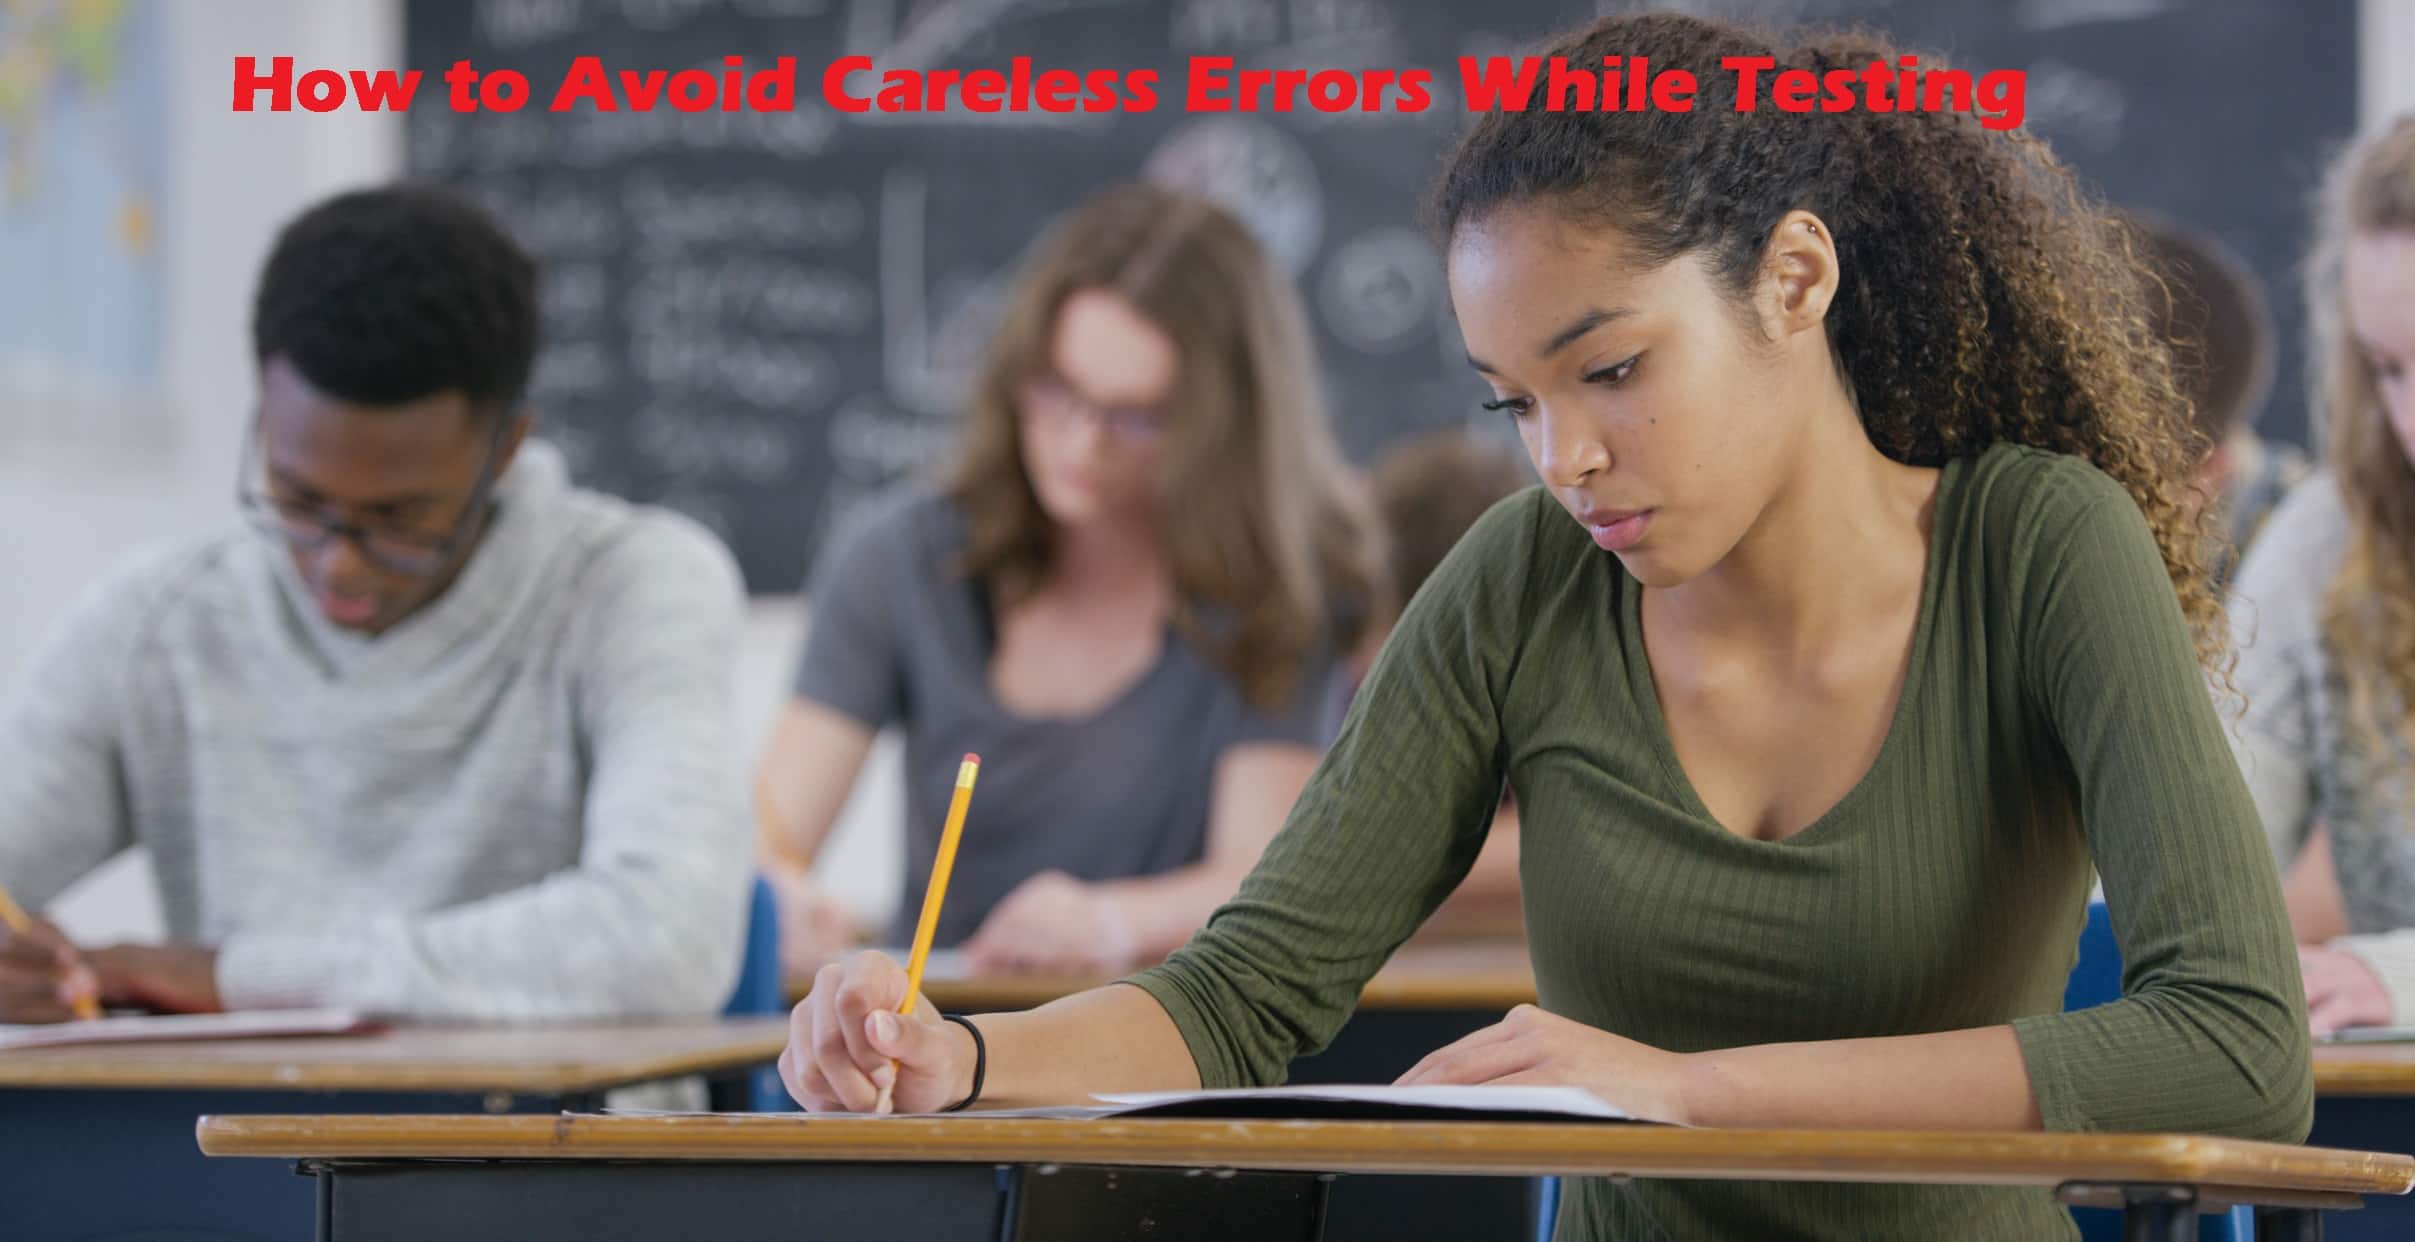 How to Avoid Careless Errors While Testing